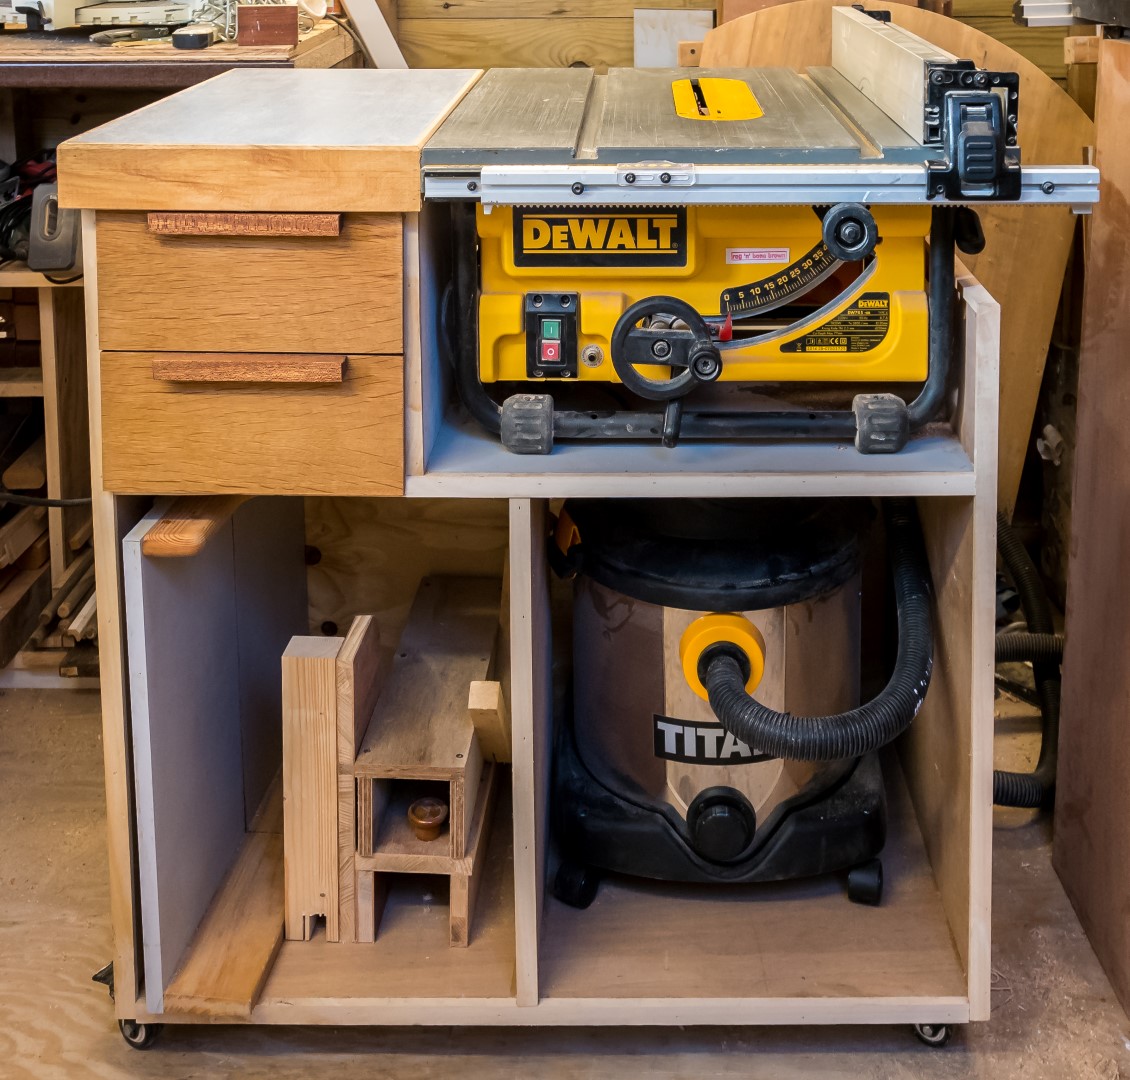 Pearly Specificity Dripping Mobile Tablesaw Stand for DeWalt DW745 (part 1 of 2) - Workshop Re-Model  Episode 2 | Rag 'n' Bone Brown - UK Woodworking and Restoration YouTube  projects